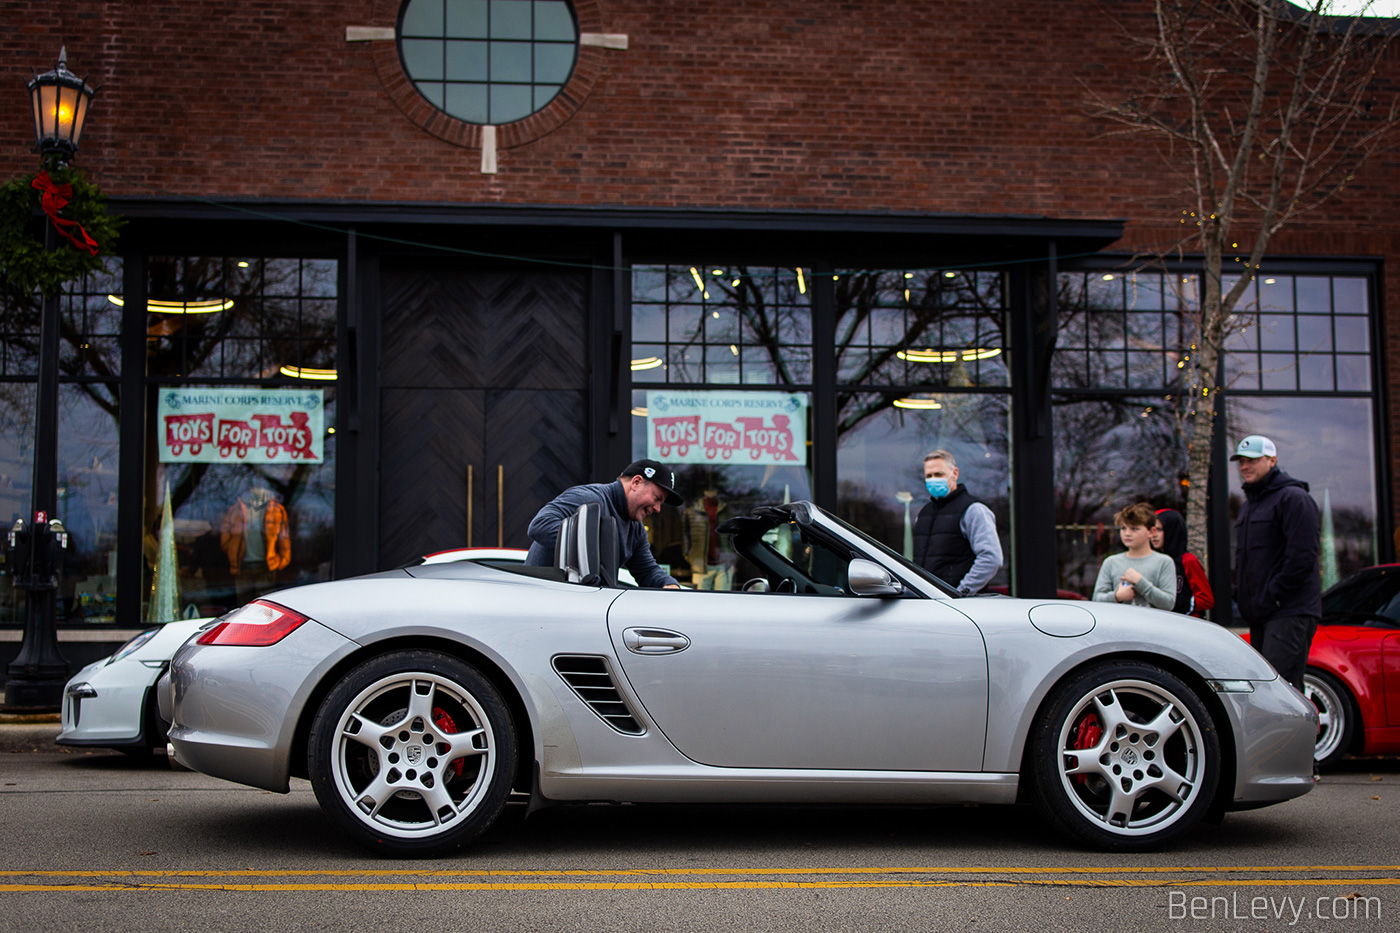 Silver Porsche Boxster at the Burdi Toys For Tots Toy Drive